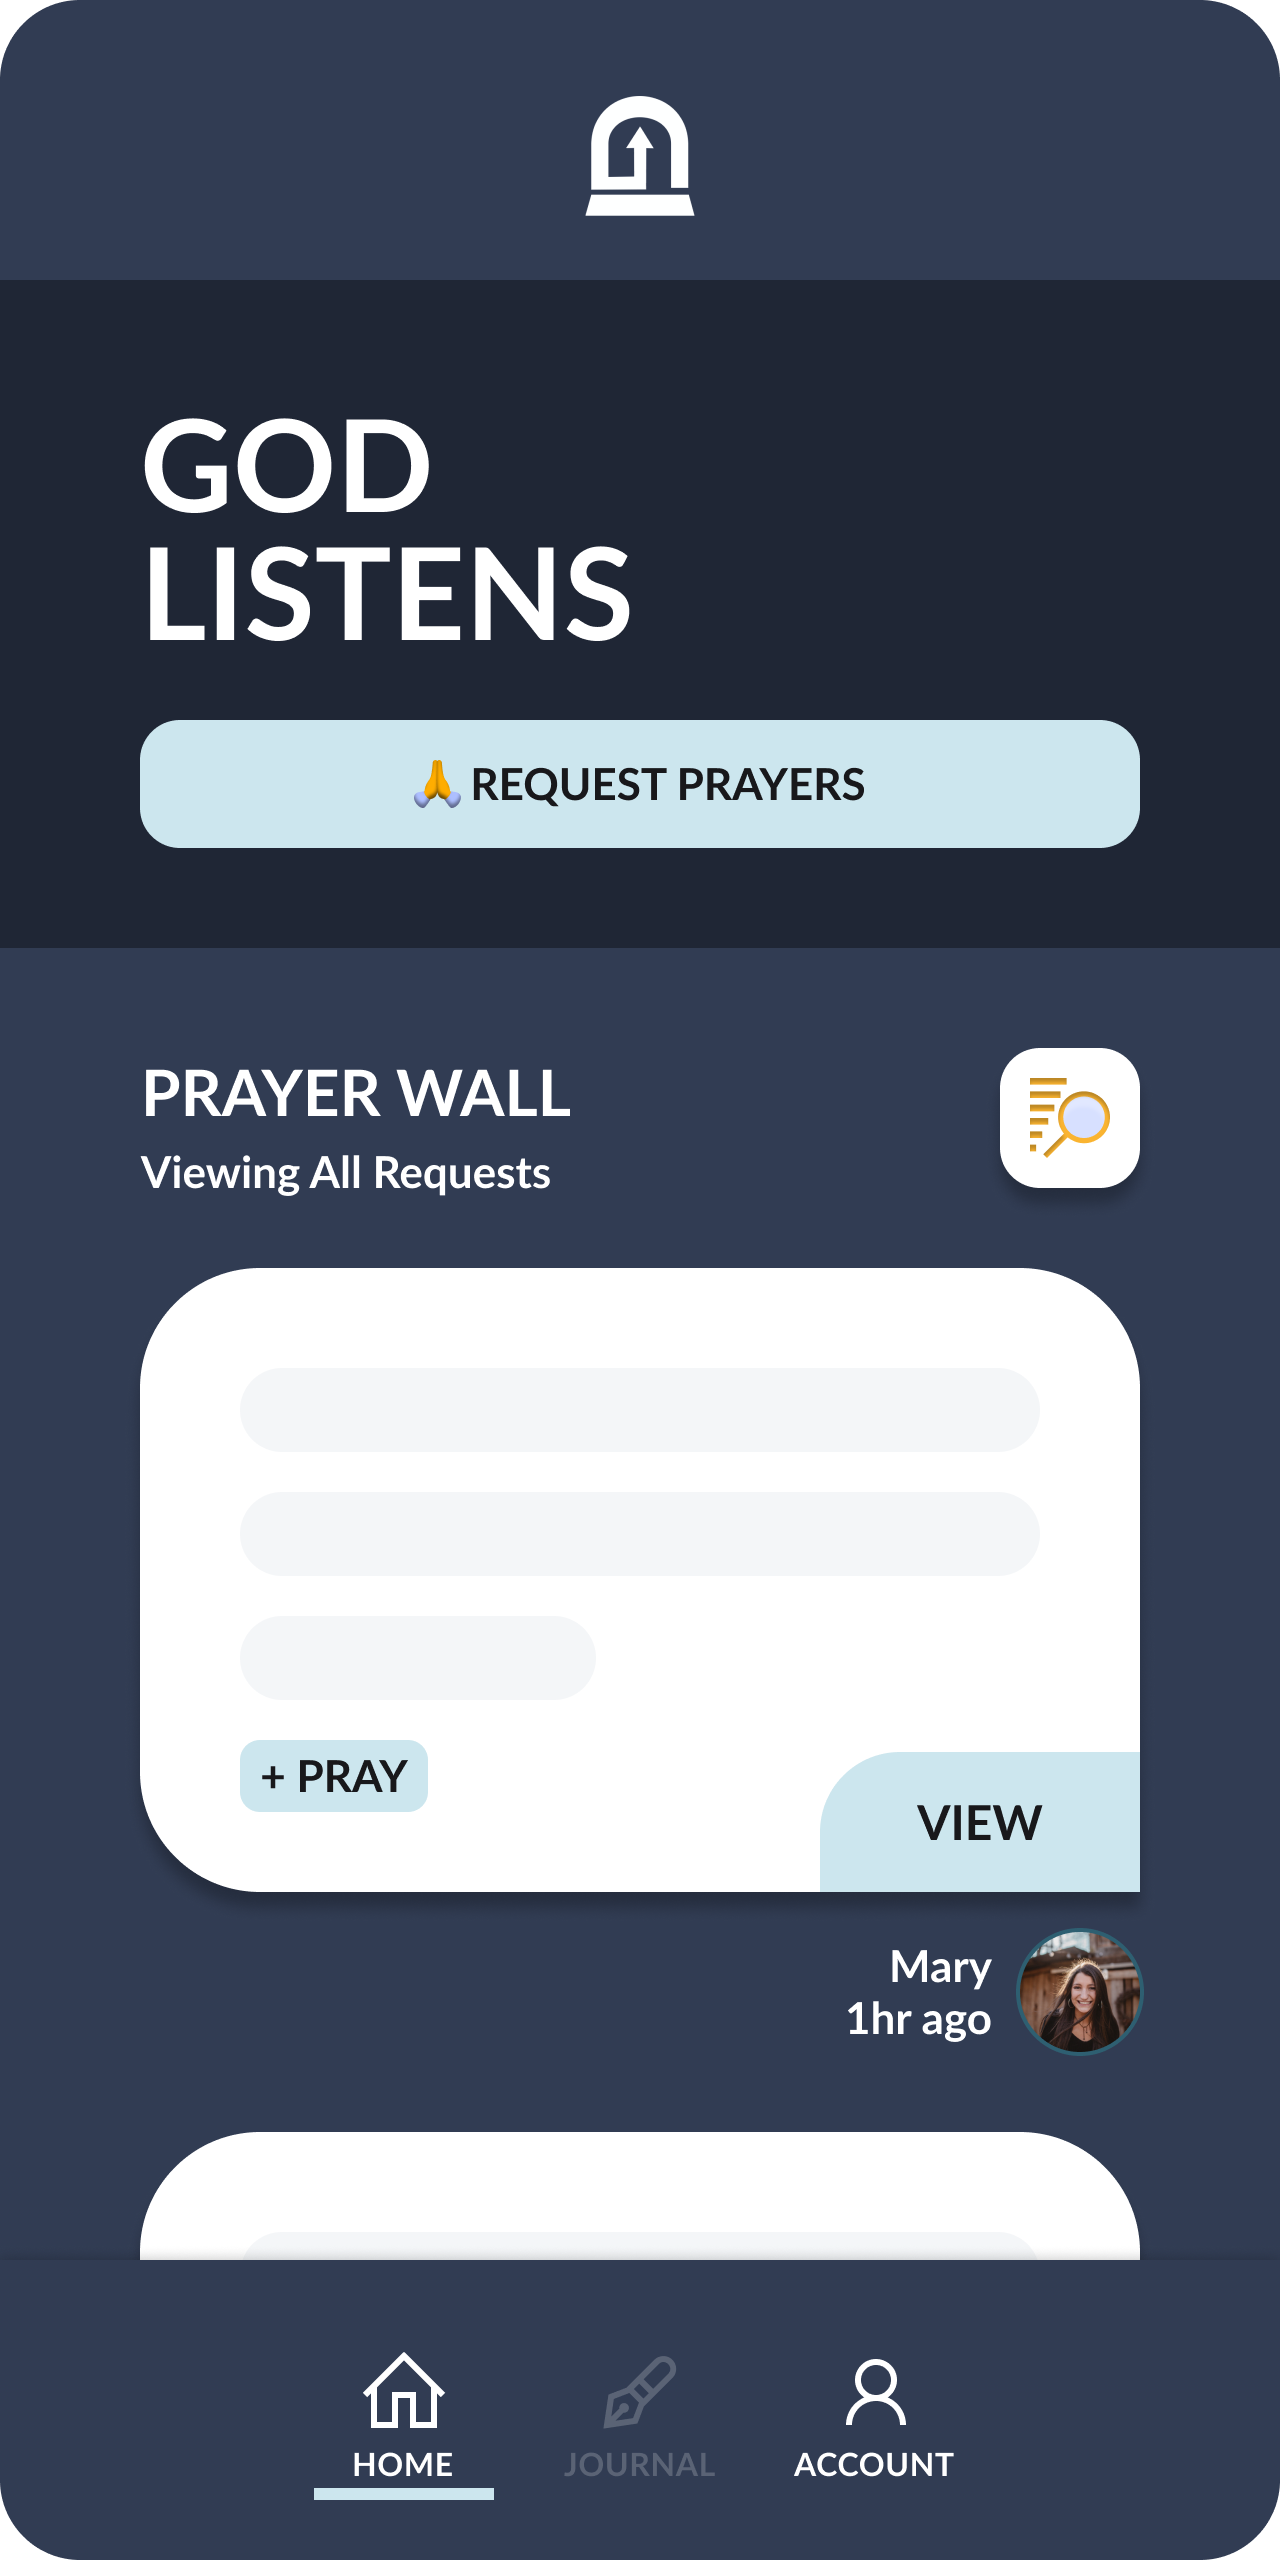 Screenshot of the God Listens mobile app showing the prayer wall and a Request Prayers button.